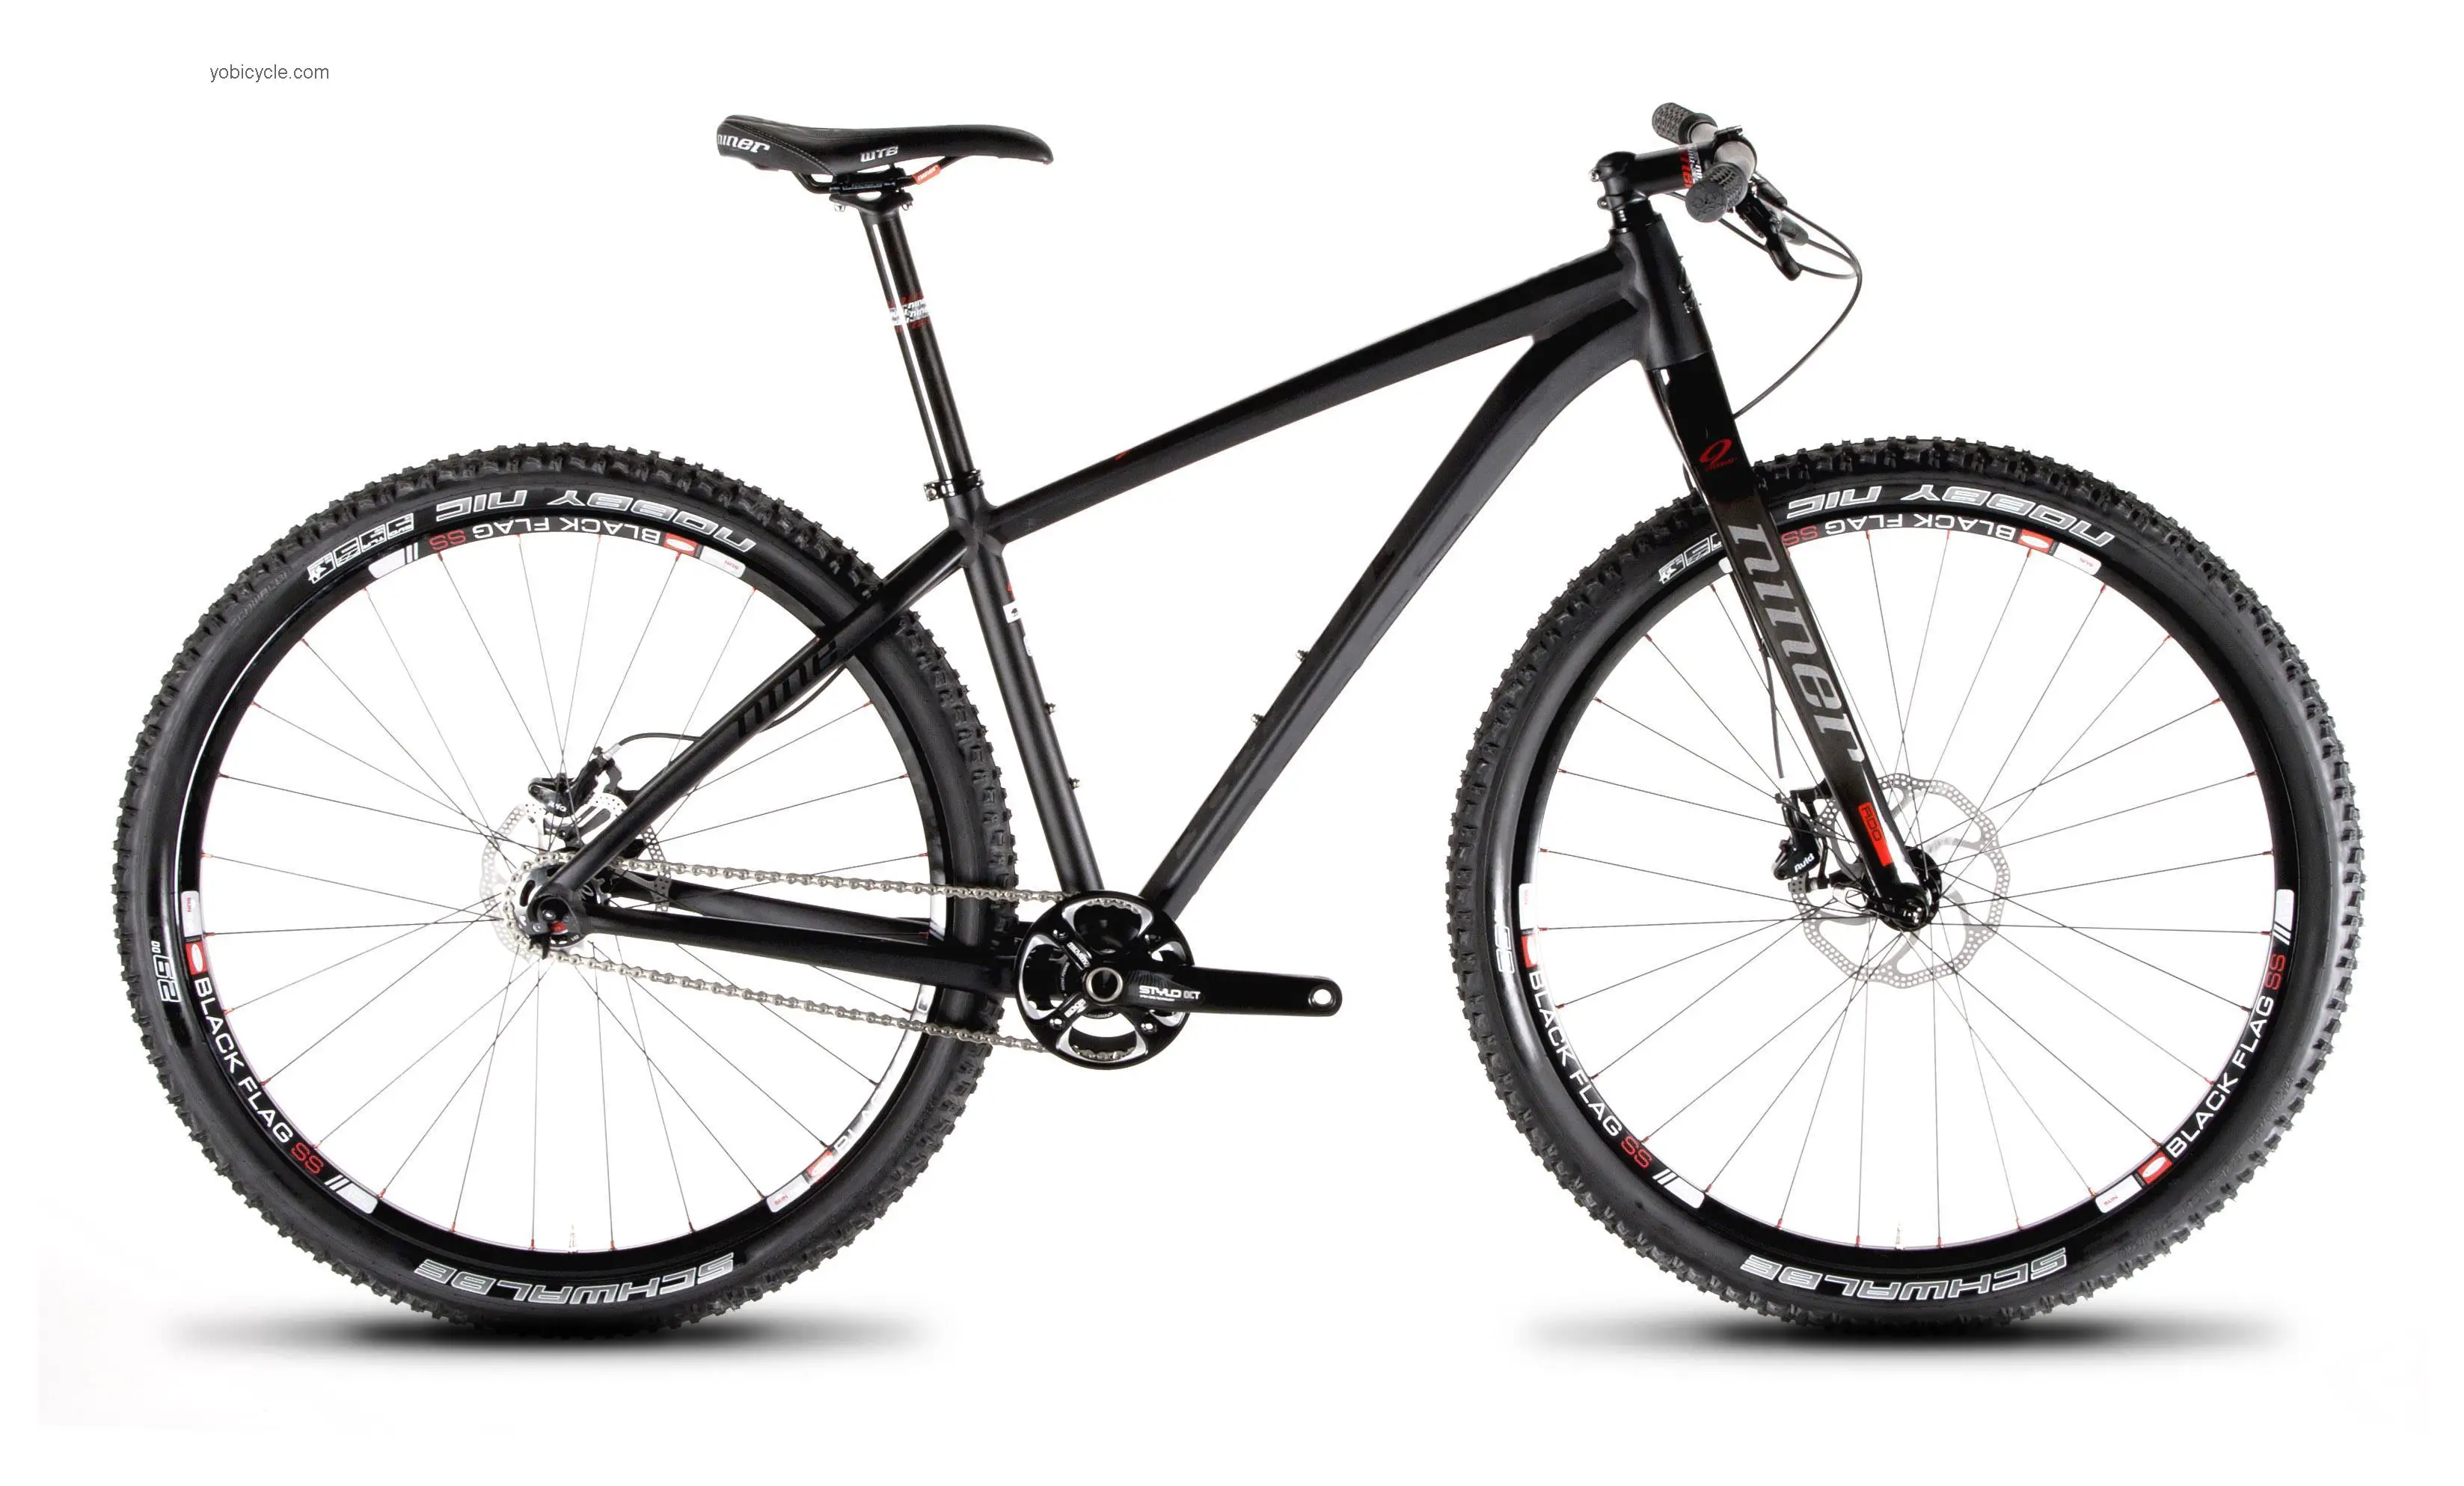 Niner One 9 competitors and comparison tool online specs and performance